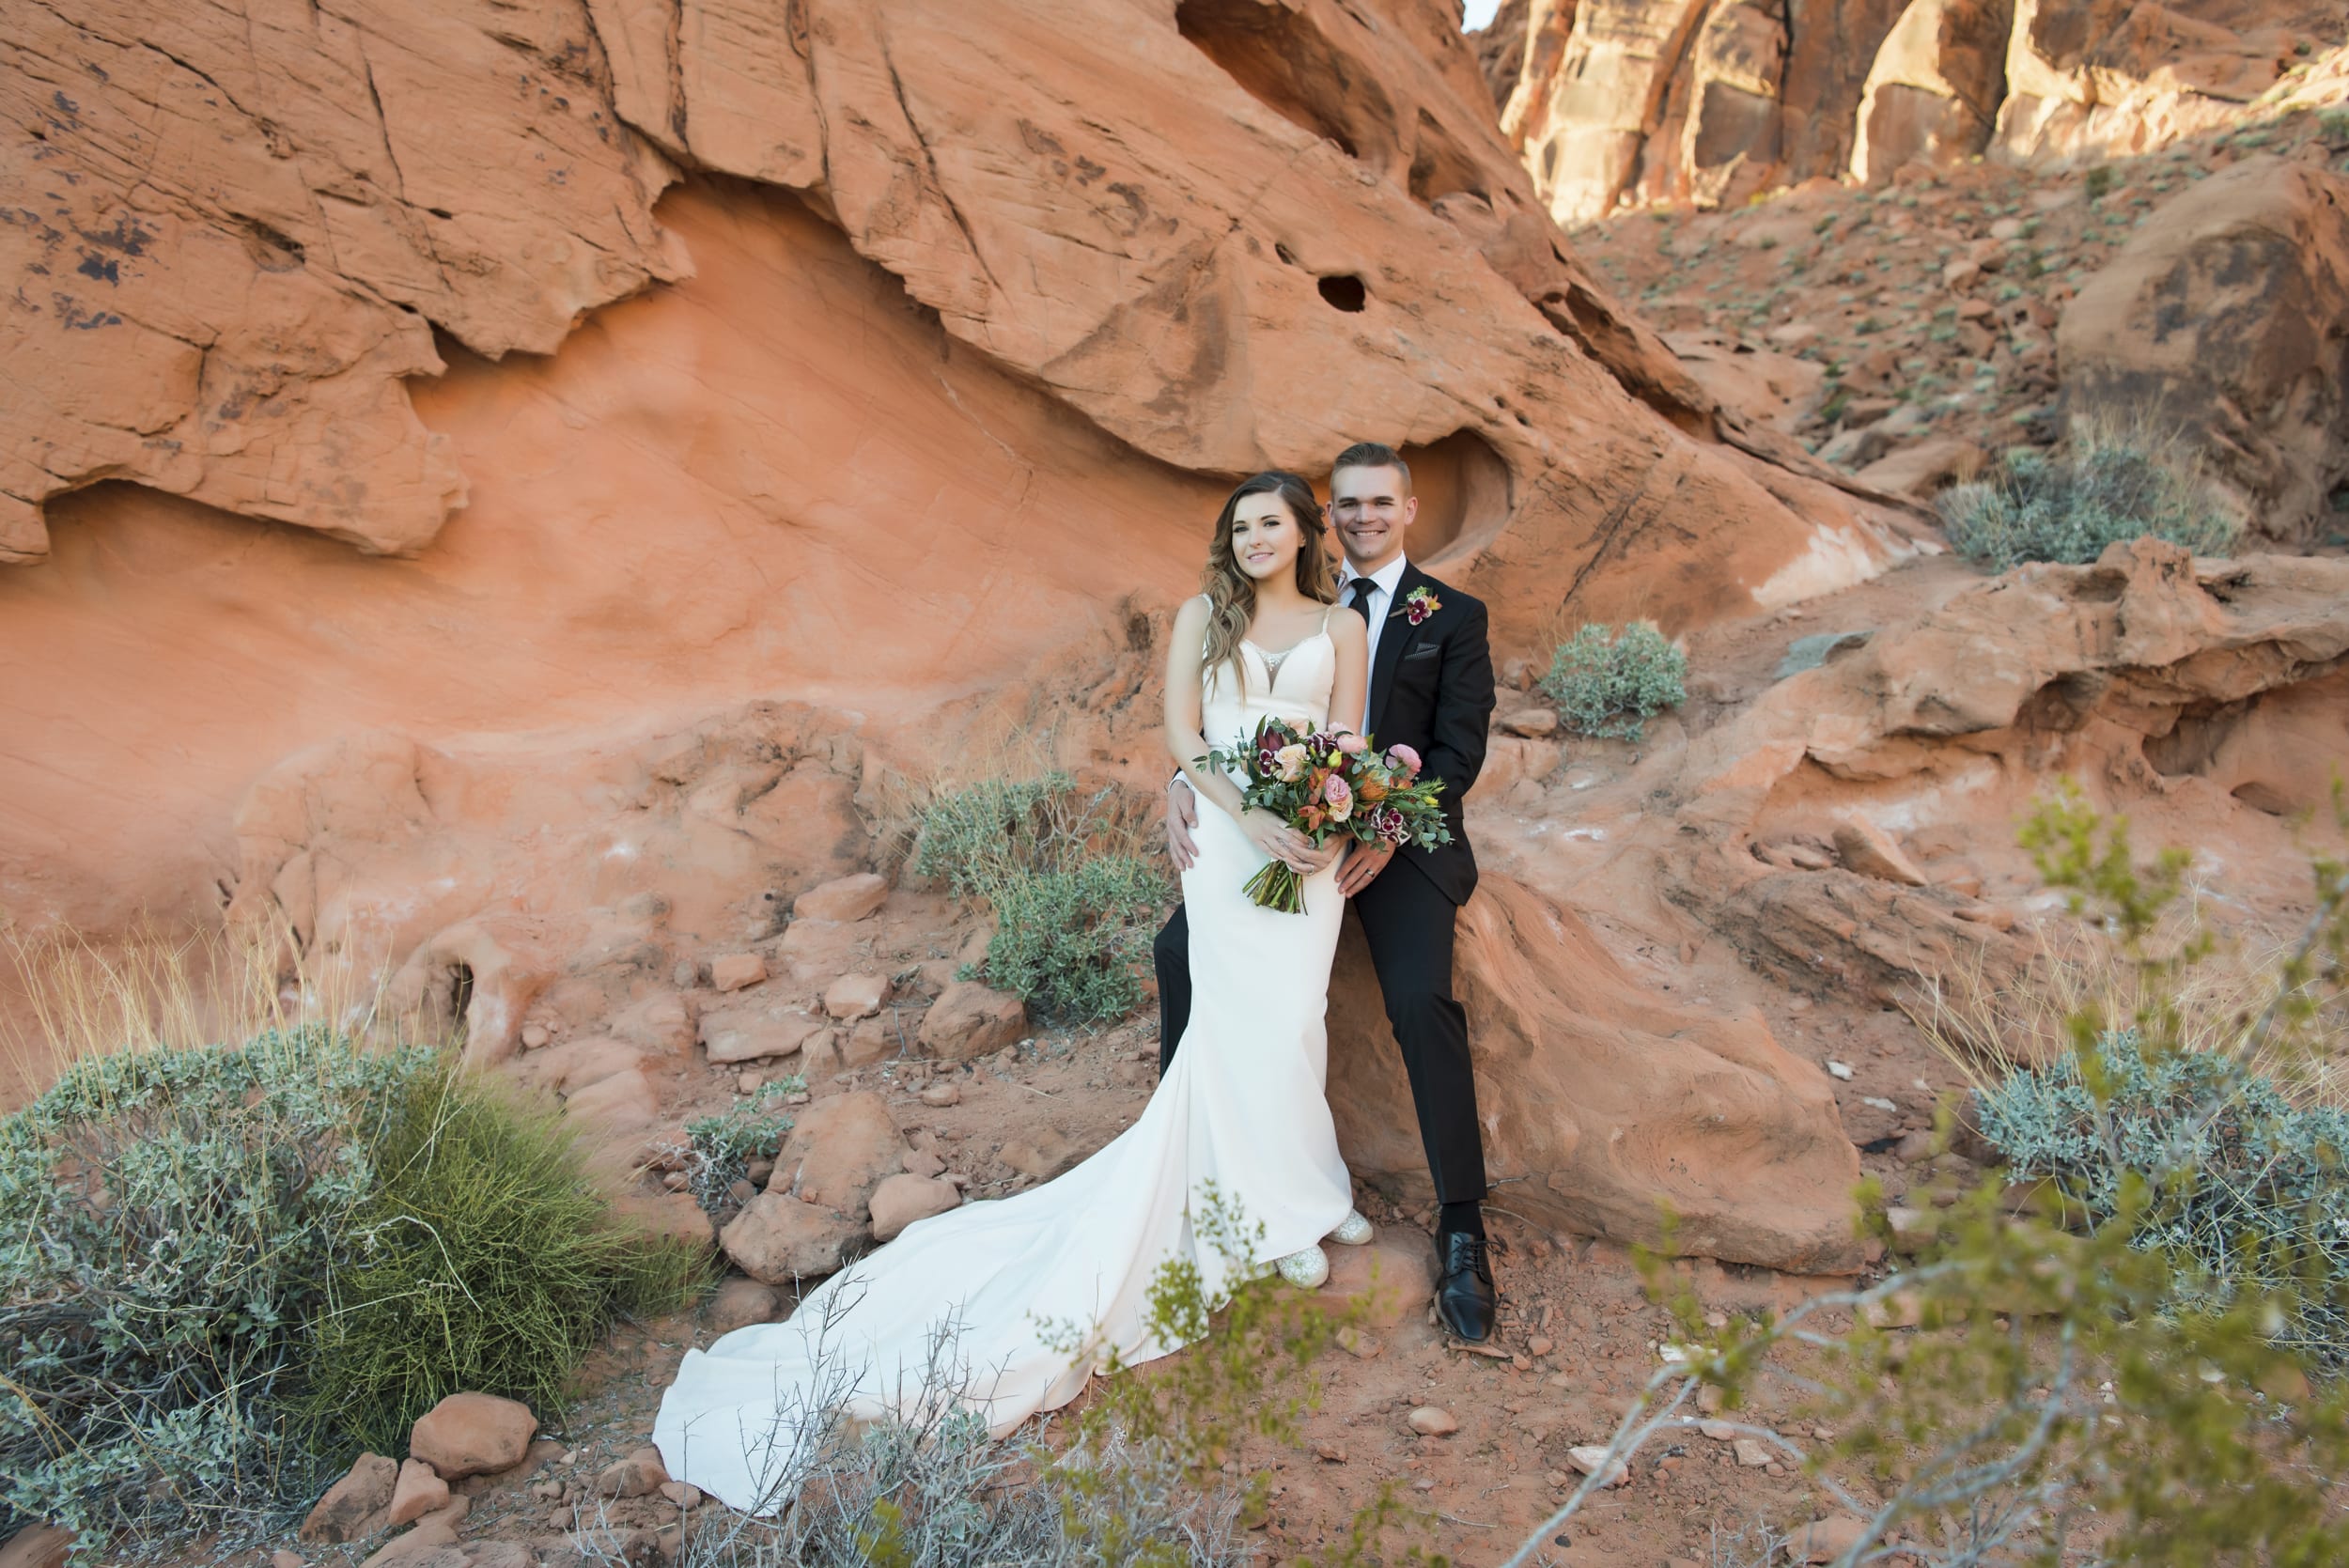 Caitlin + Joseph: A Real Wedding at Valley of Fire